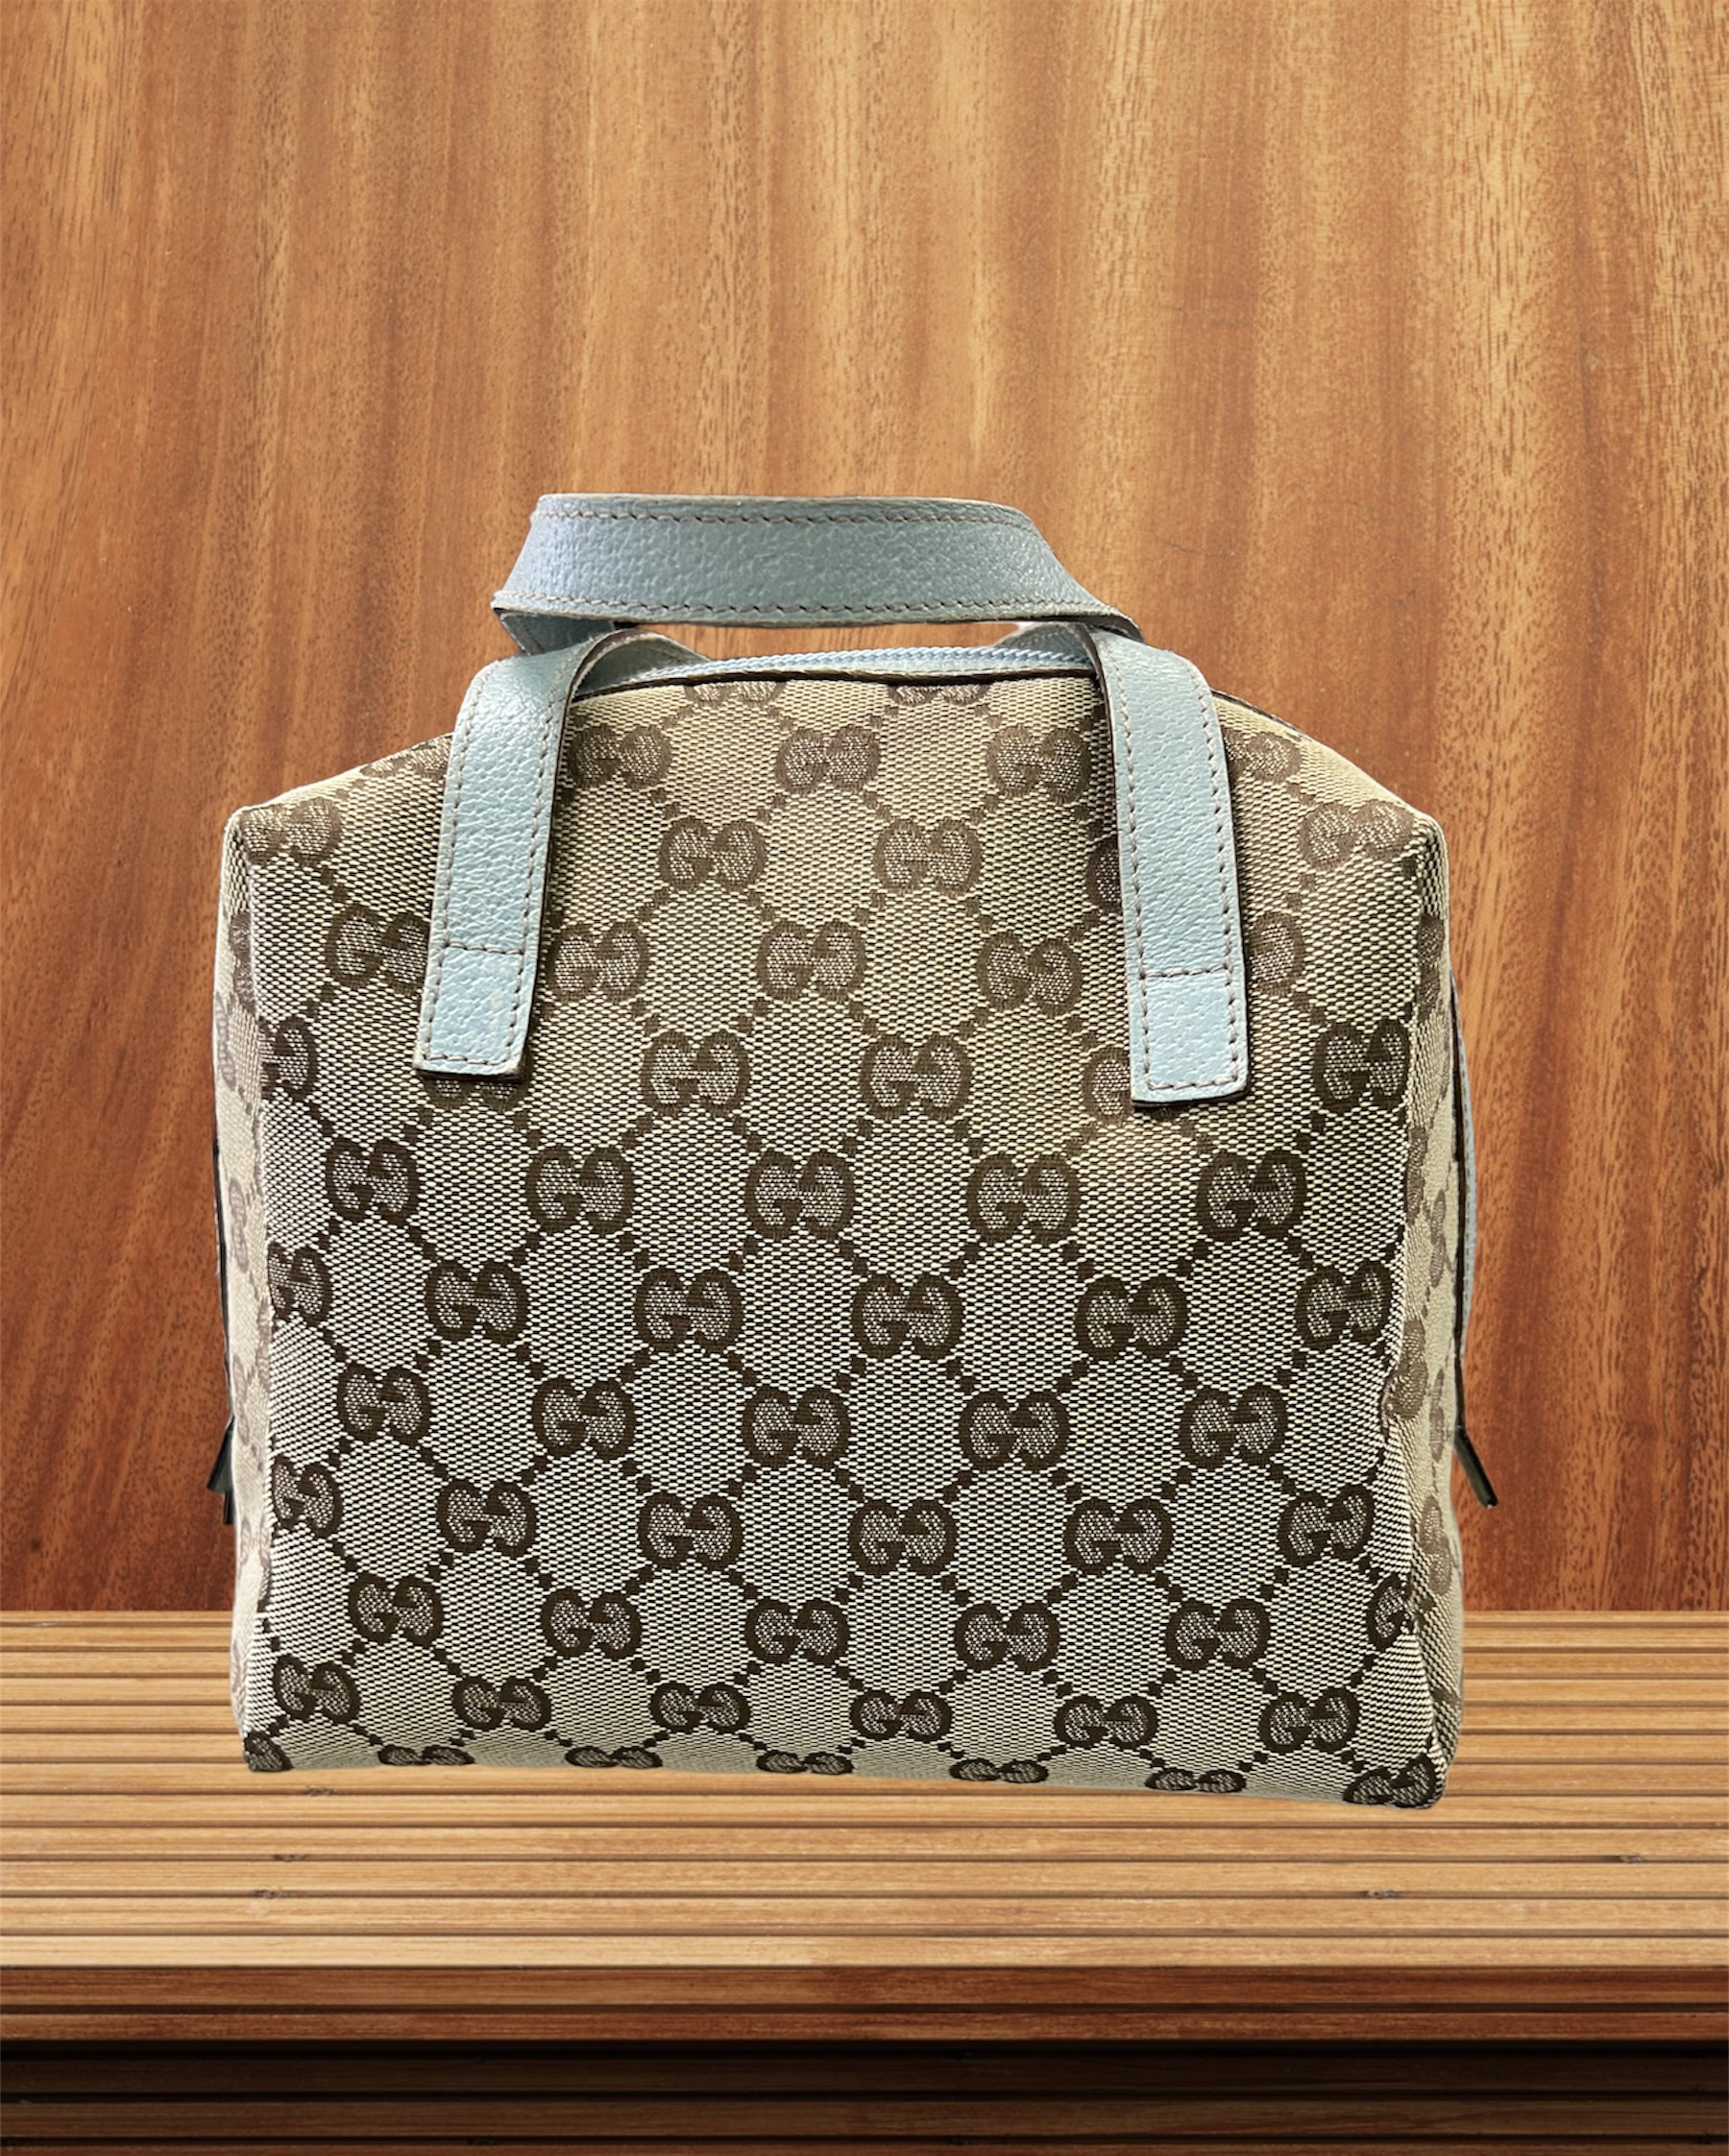 GUCCI GG Canvas MINI Zip around Bowling BAG
This bag is VINTAGE
Serial Number 124542-0416
Size:
Length: 7.50 in
Width: 4.00 in
Height: 7.50 in
Drop: 2.75 in
This is an authentic GUCCI Monogram Mini bag in Sky Blue. This stylish mini satchel is crafted of beige Gucci GG monogram canvas. The bag features sky blue leather top handles and trim with a wrap around zipper. This opens to a black fabric interior. This is a superb tiny tote for everyday essentials from Gucci!
Great Buy for someone starting to branch out to GUCCI or add a fun Vintage piece to their collection.
Overall in good condition.  Signs of wear on the handles.  Canvas and Interior in great condition.
Most sites are selling this bag easlily over $500.00
Adorable!